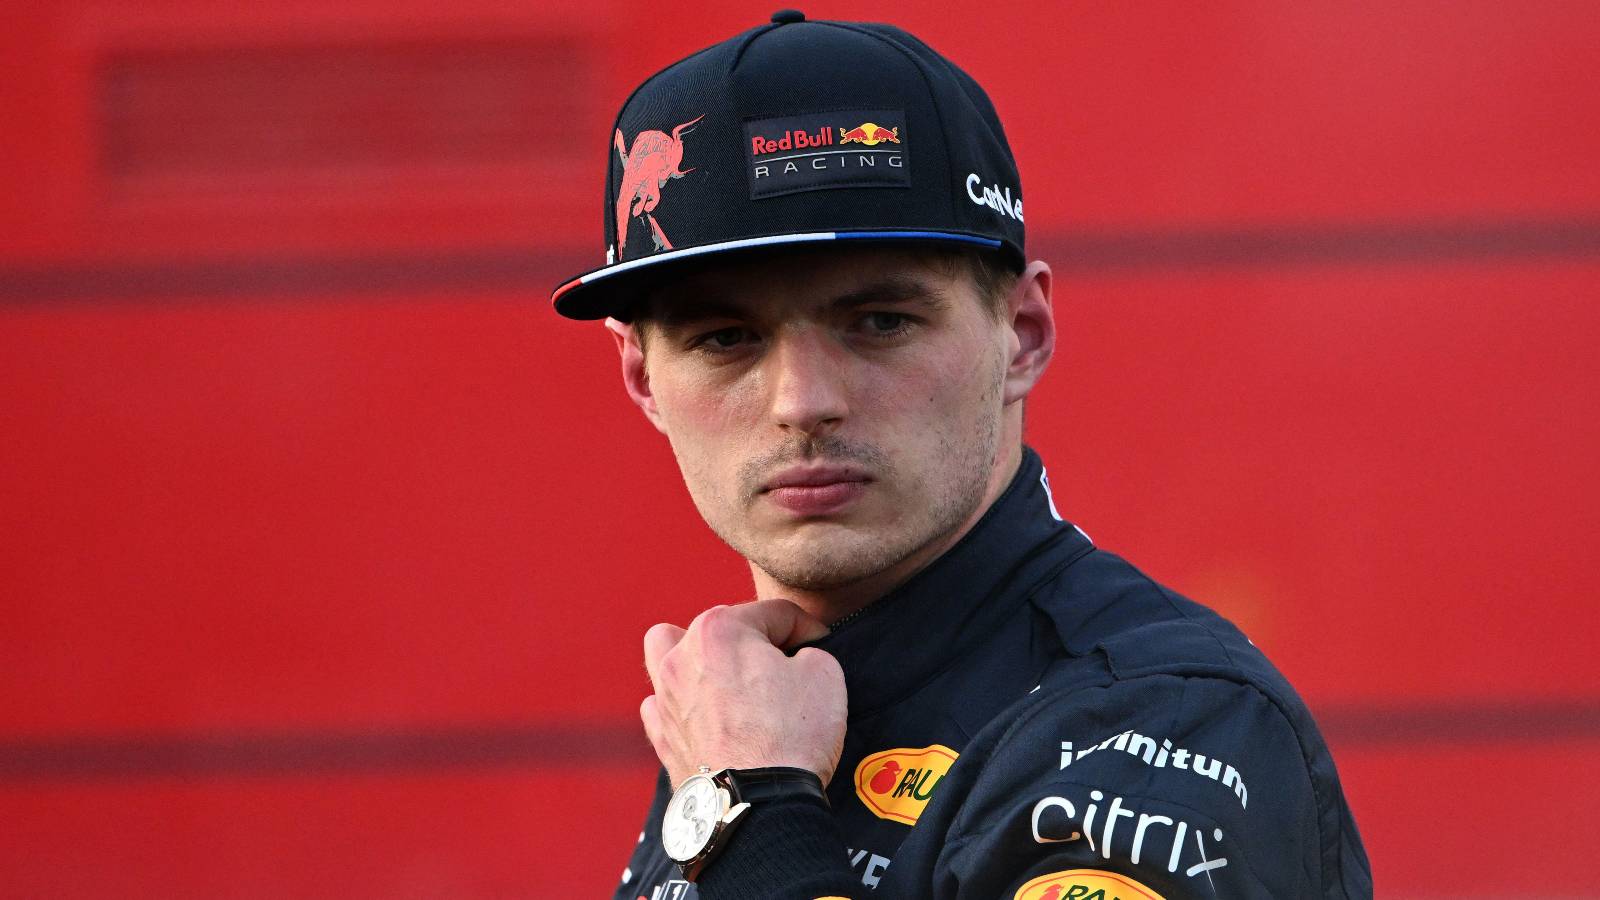 Max Verstappen launches his own racing team in partnership with Red Bull